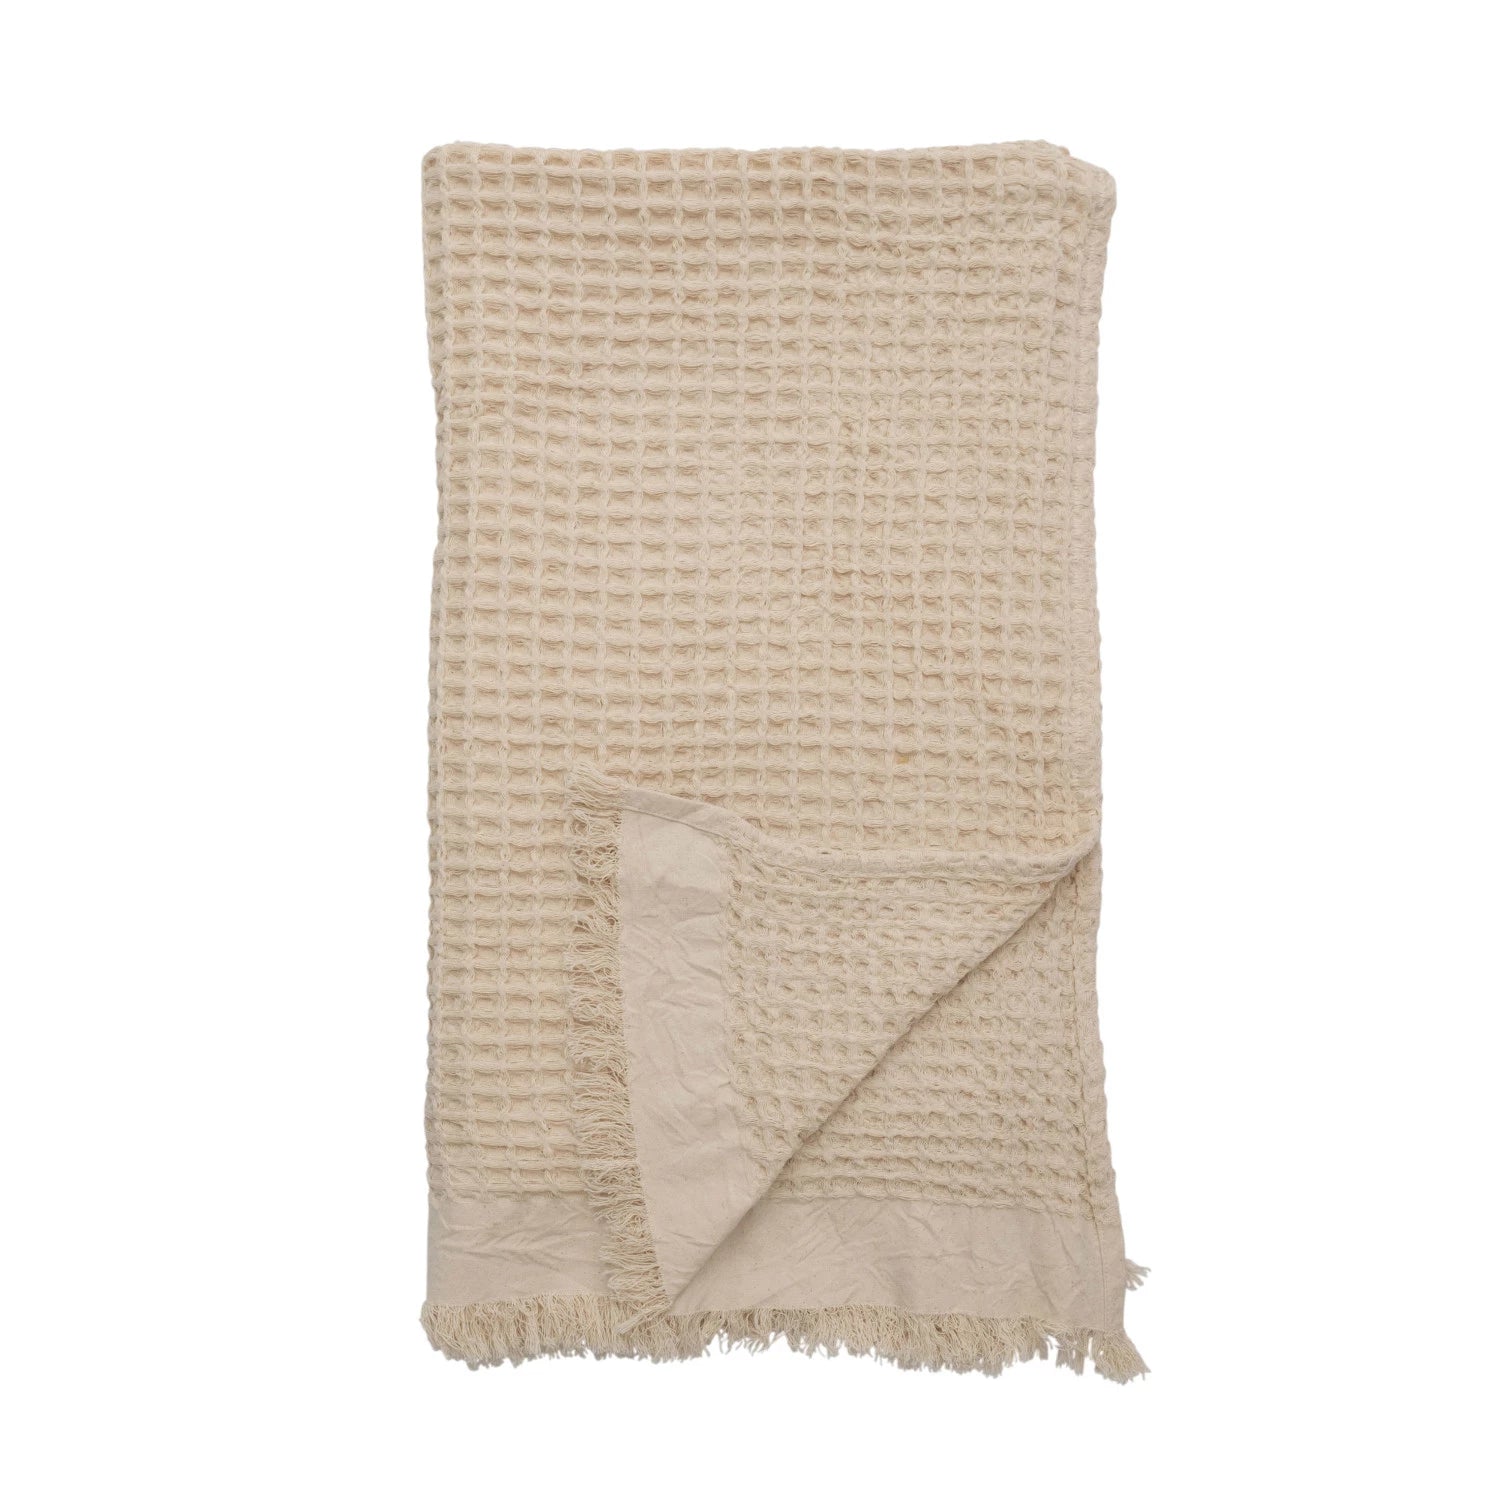 Cotton Waffle Weave Throw with Fringe, Color Options